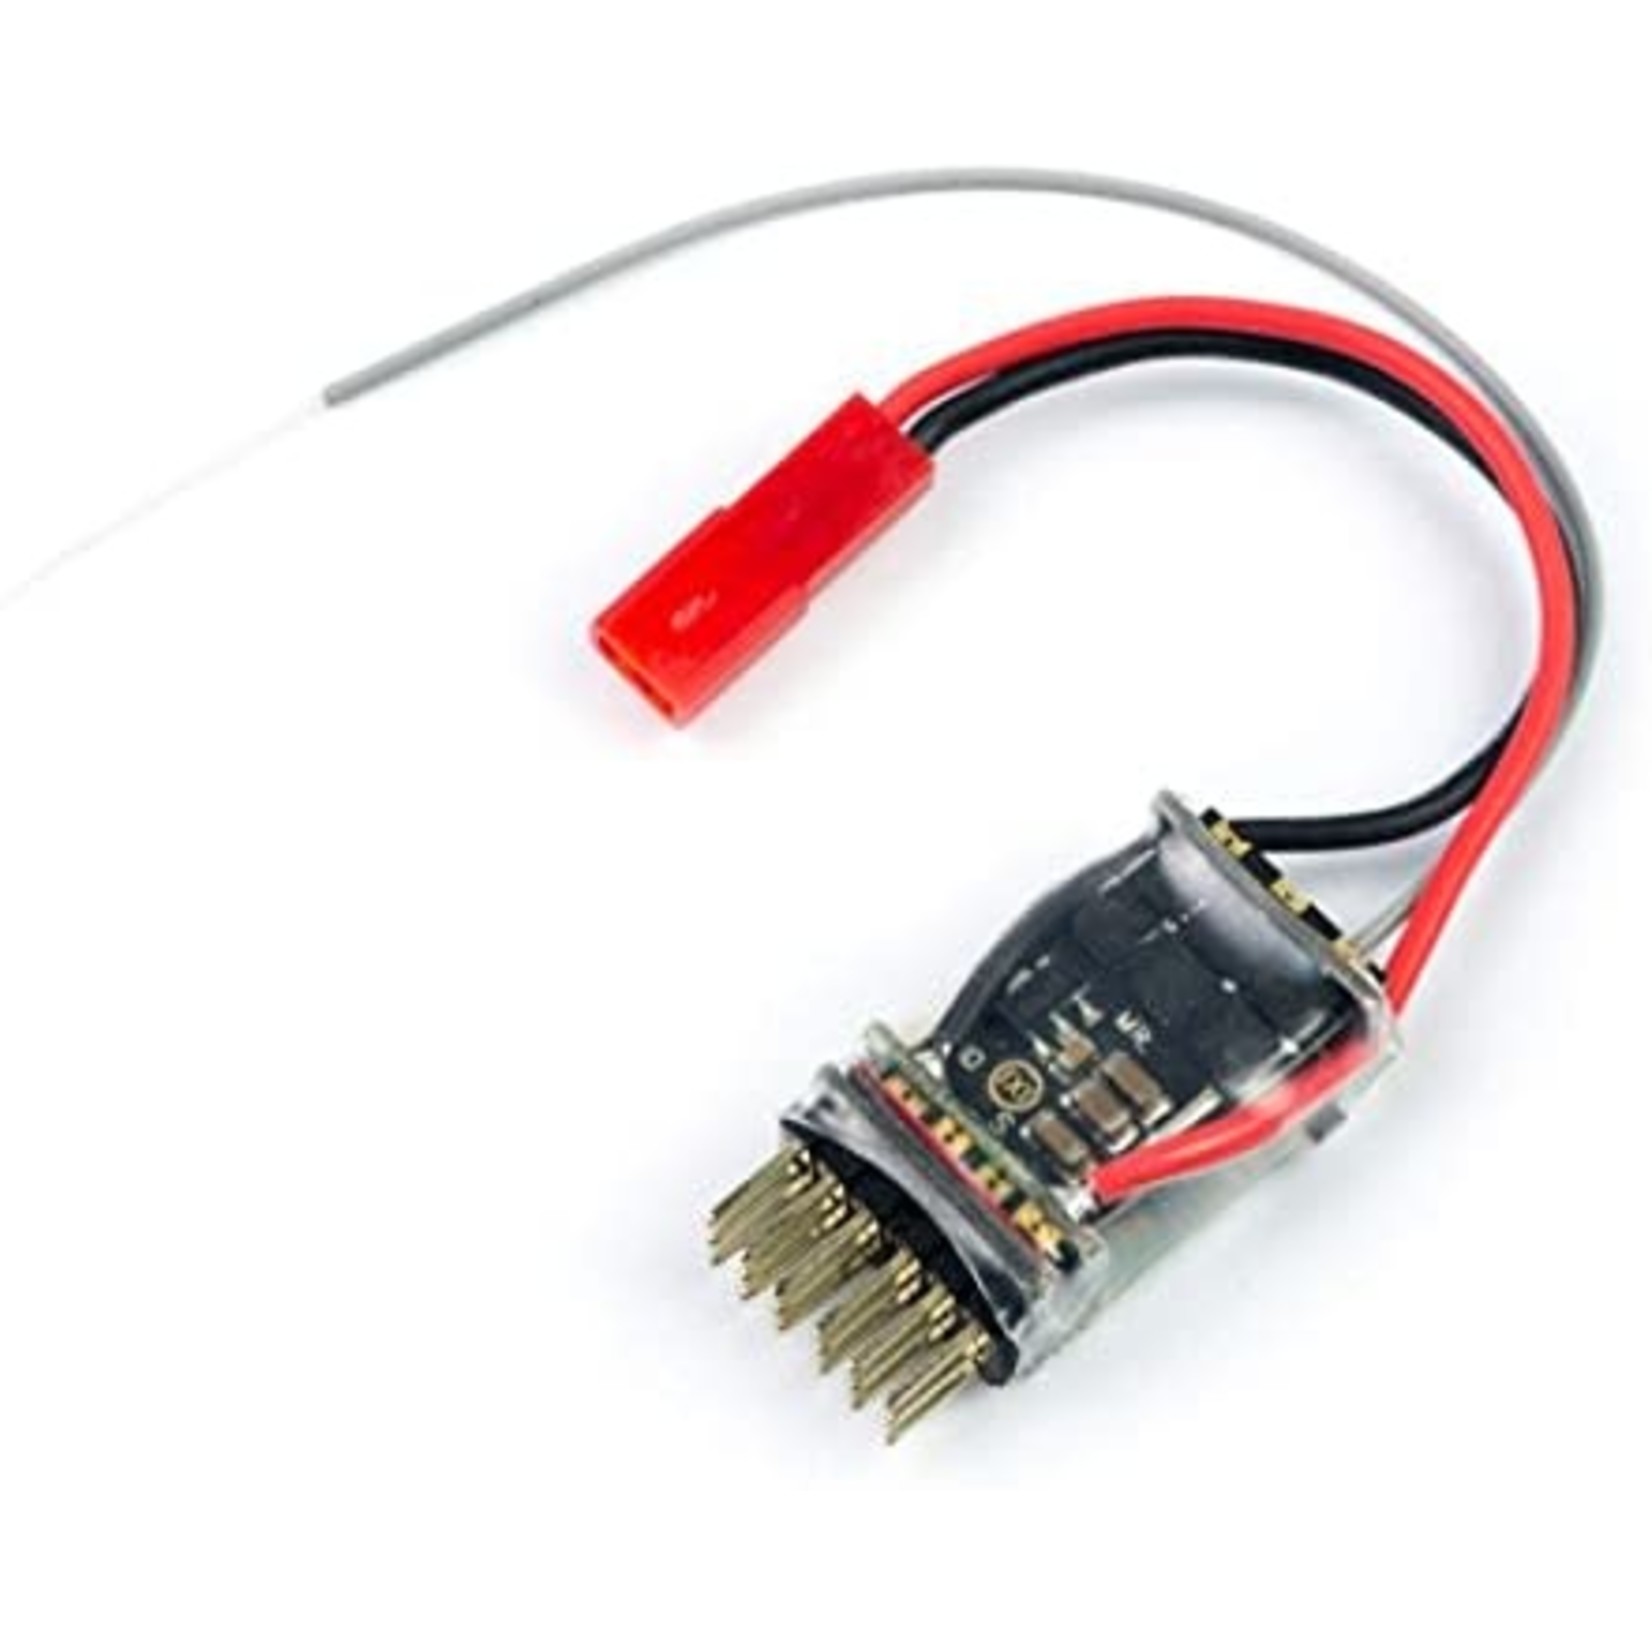 6Ch Micro Receiver with built in 15A ESC DSMX